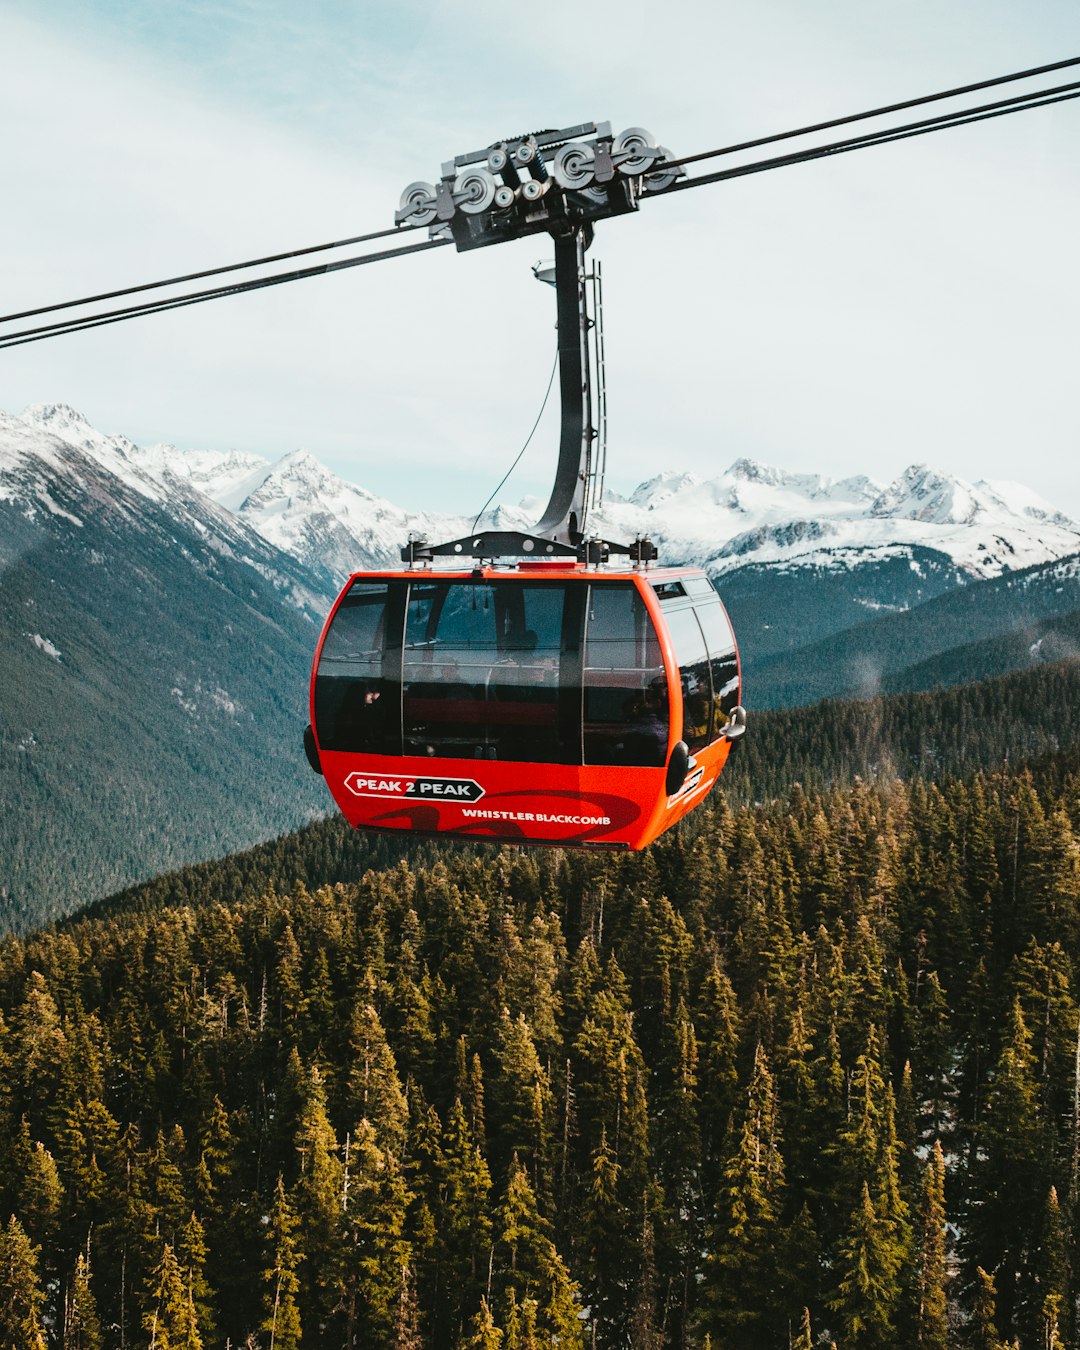 travelers stories about Hill station in Whistler, Canada